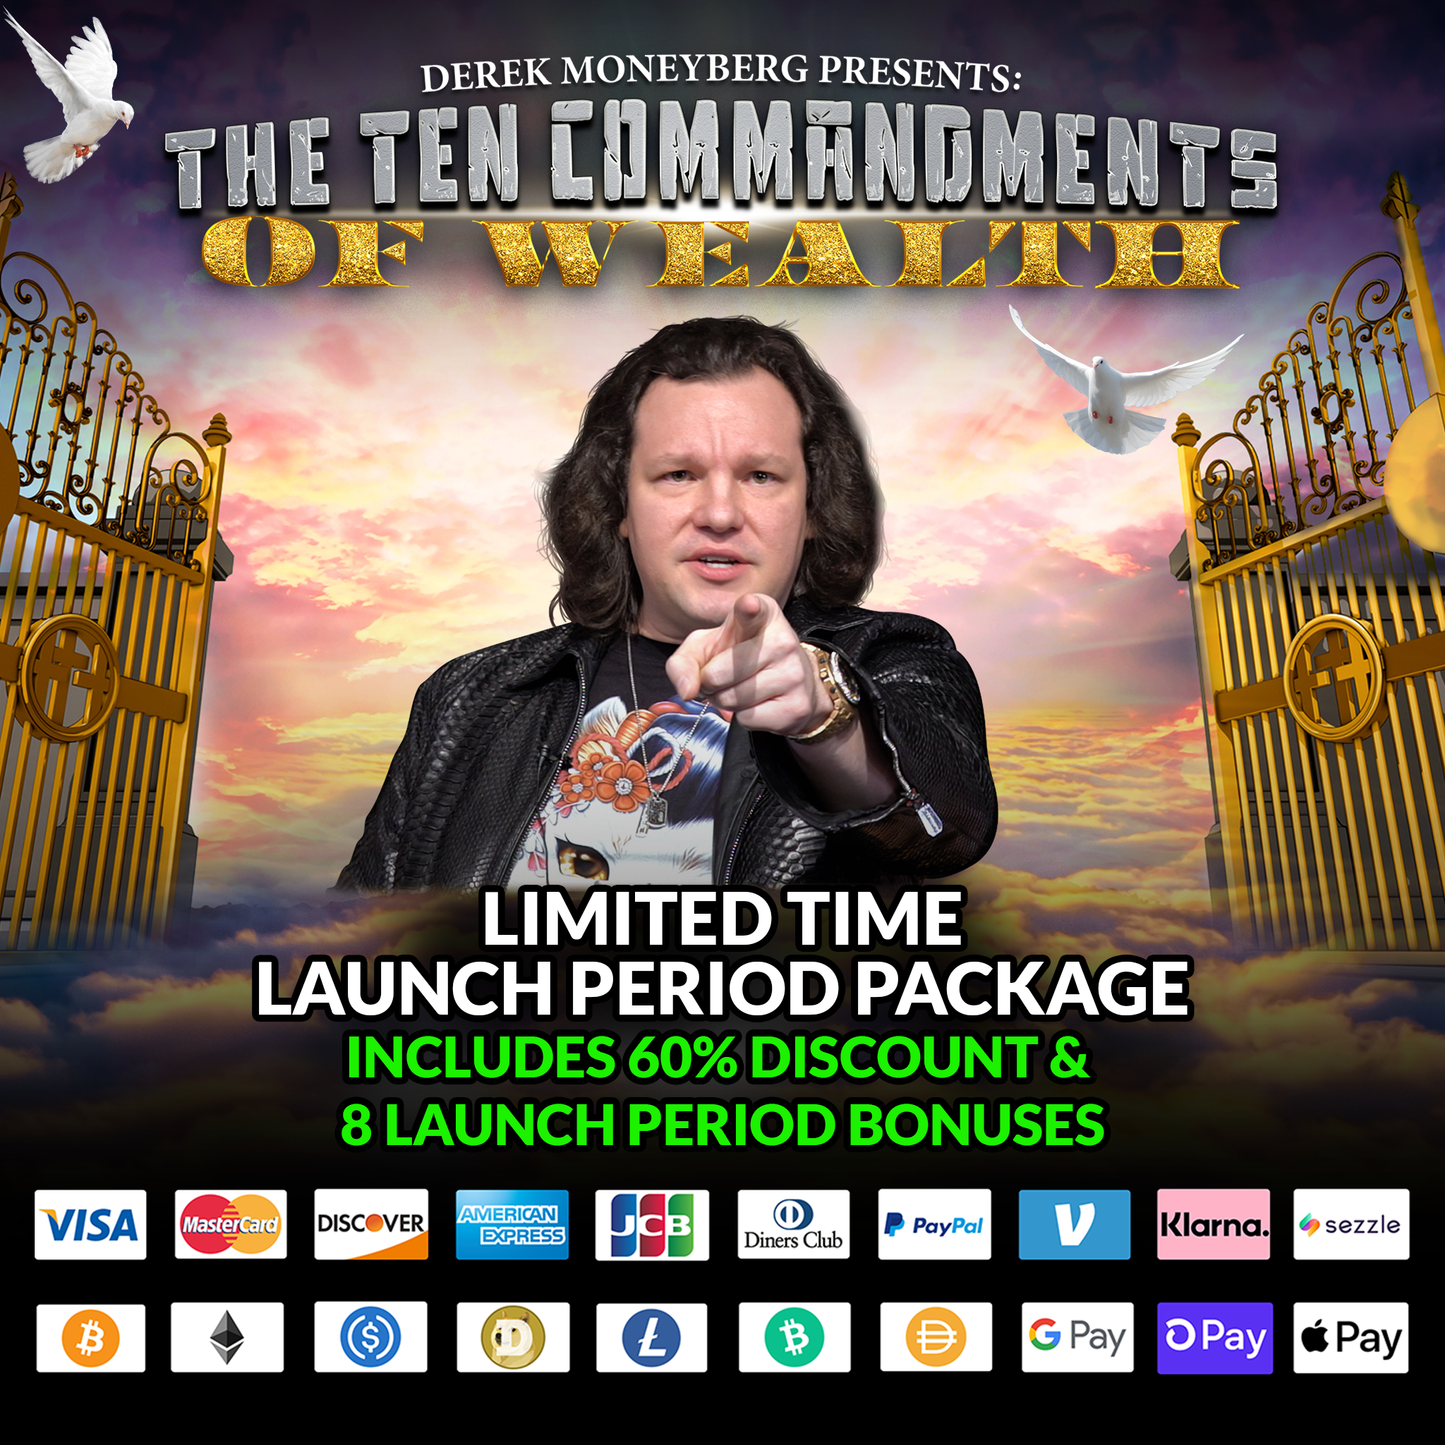 Derek Moneyberg Presents: The Ten Commandments of Wealth (Limited Time Launch Period Package)